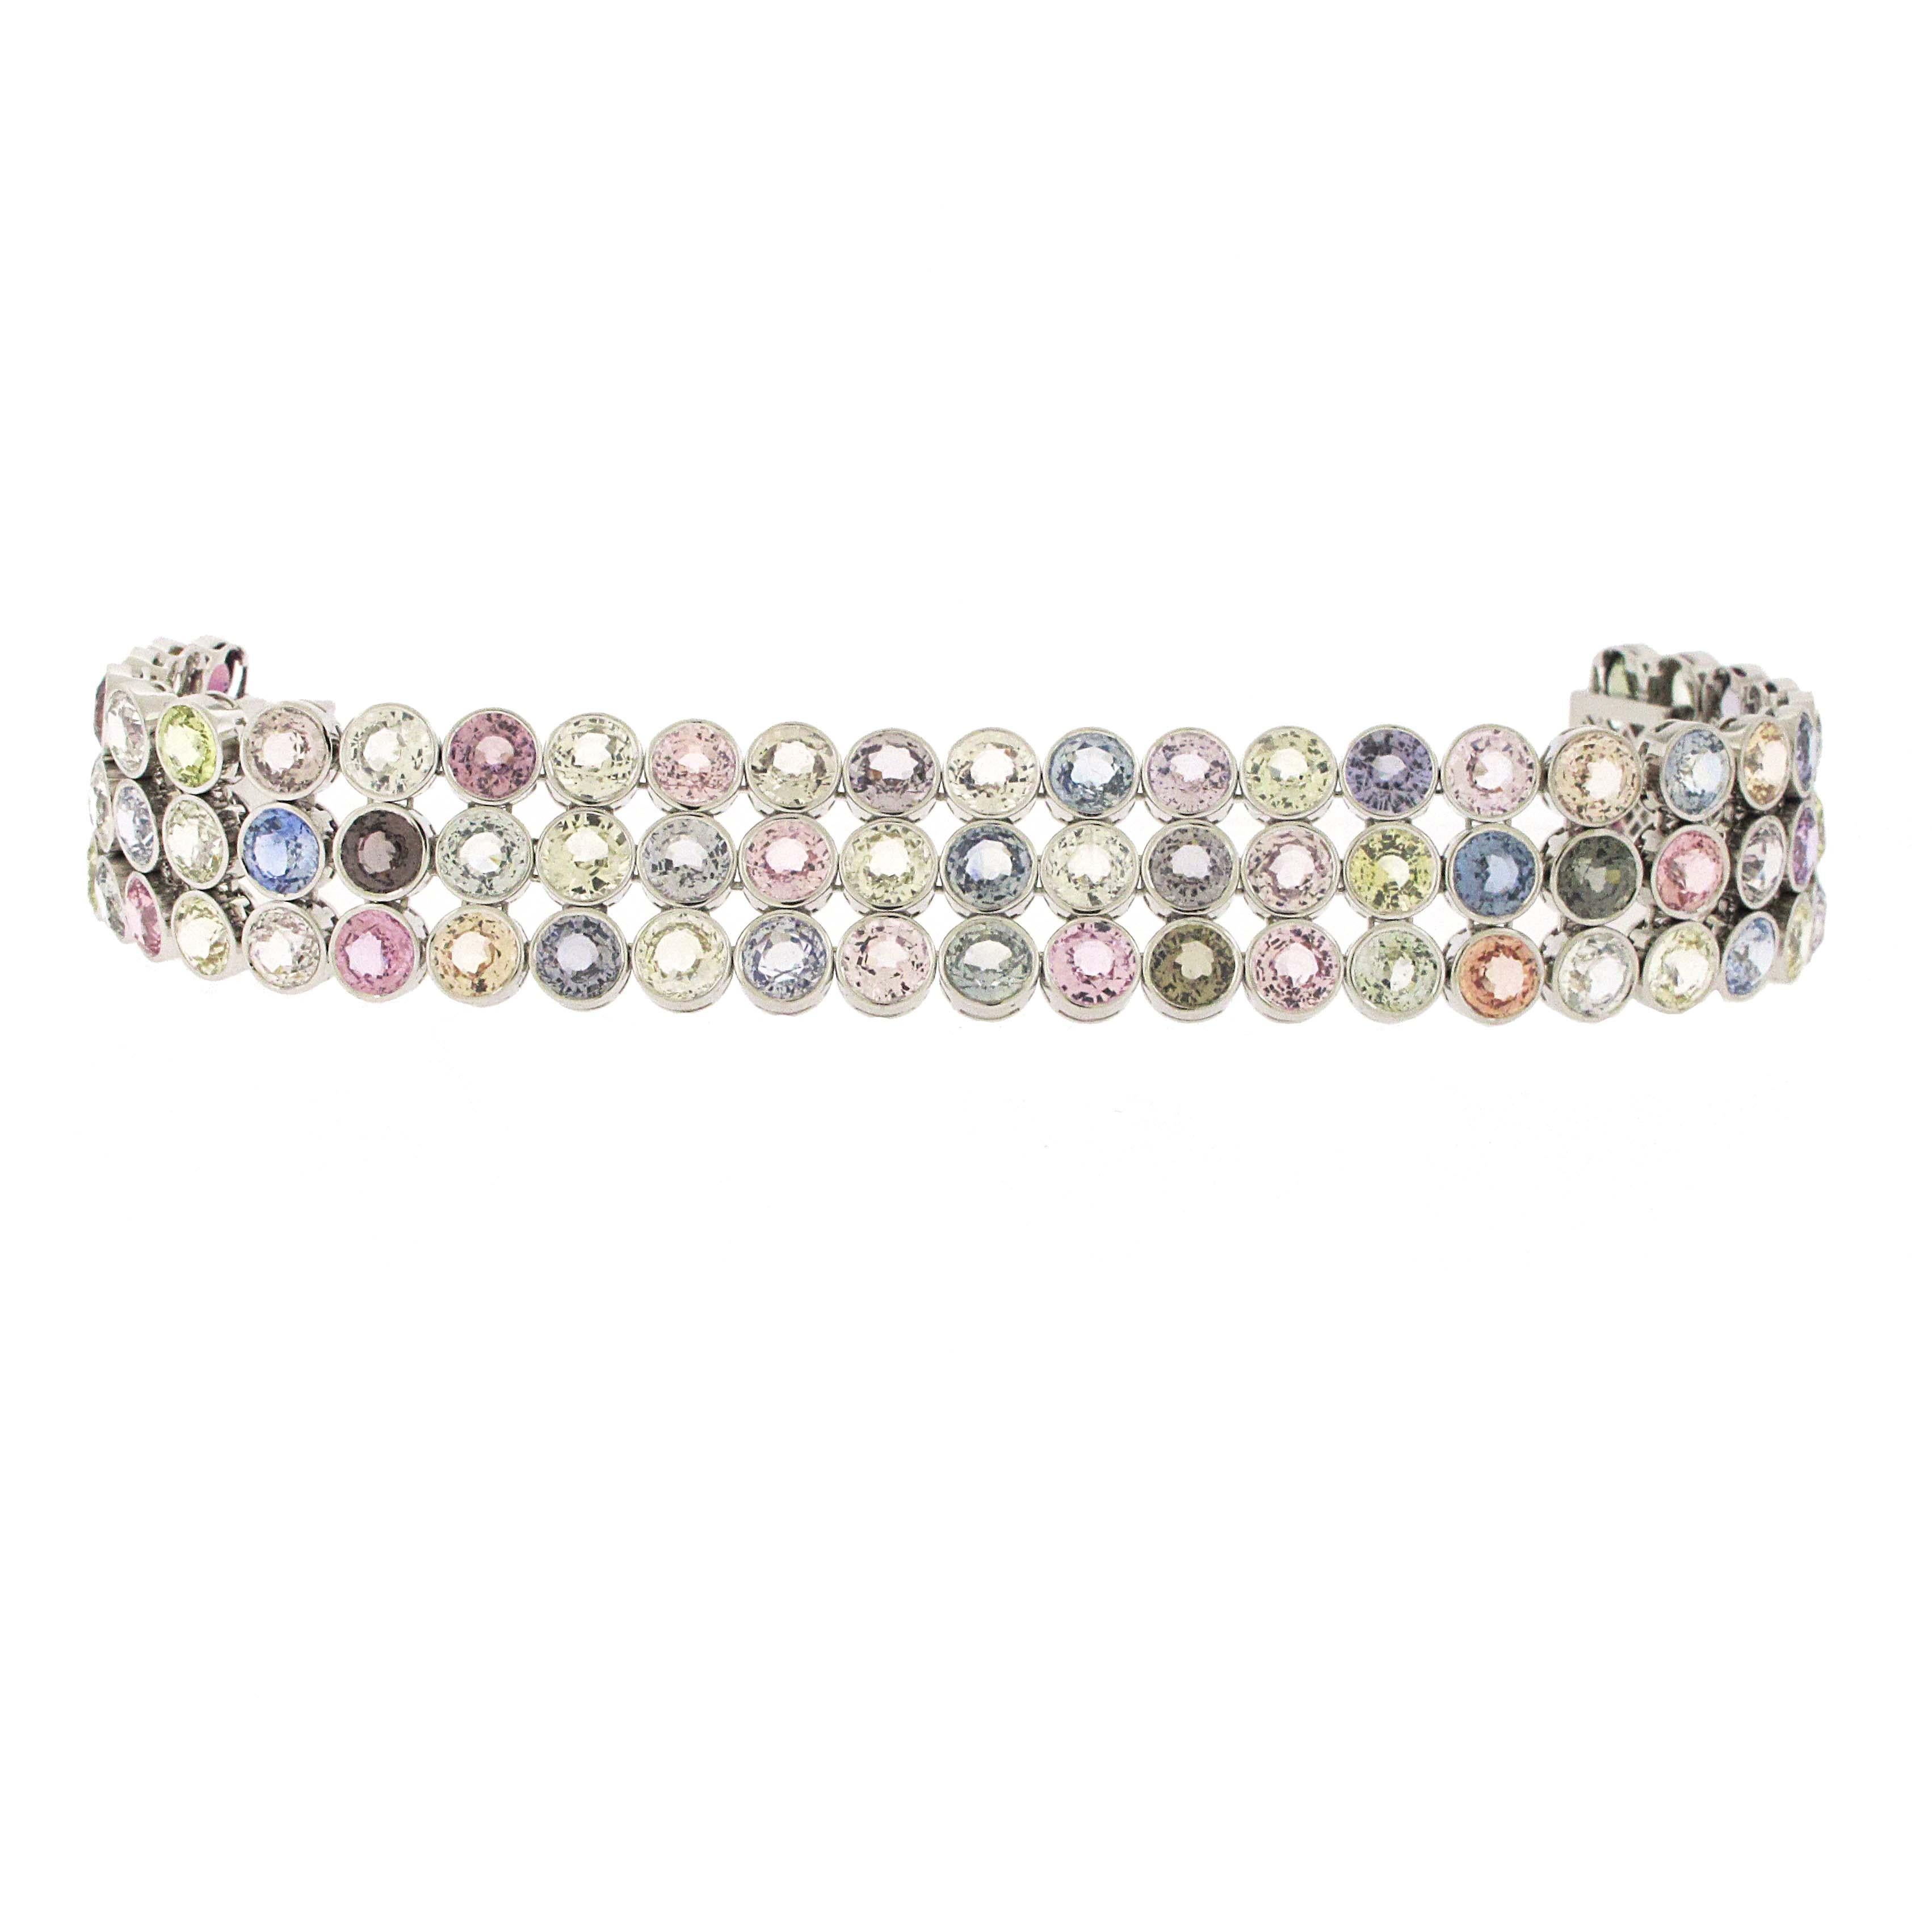 Pastel colored sapphires are all the rage! This bracelet has over 58 carats of multi-colored sapphires ranging from blues to greens to pinks. This is an extremely unique bracelet and another cannot be had. Round cut sapphires are the hardest to find